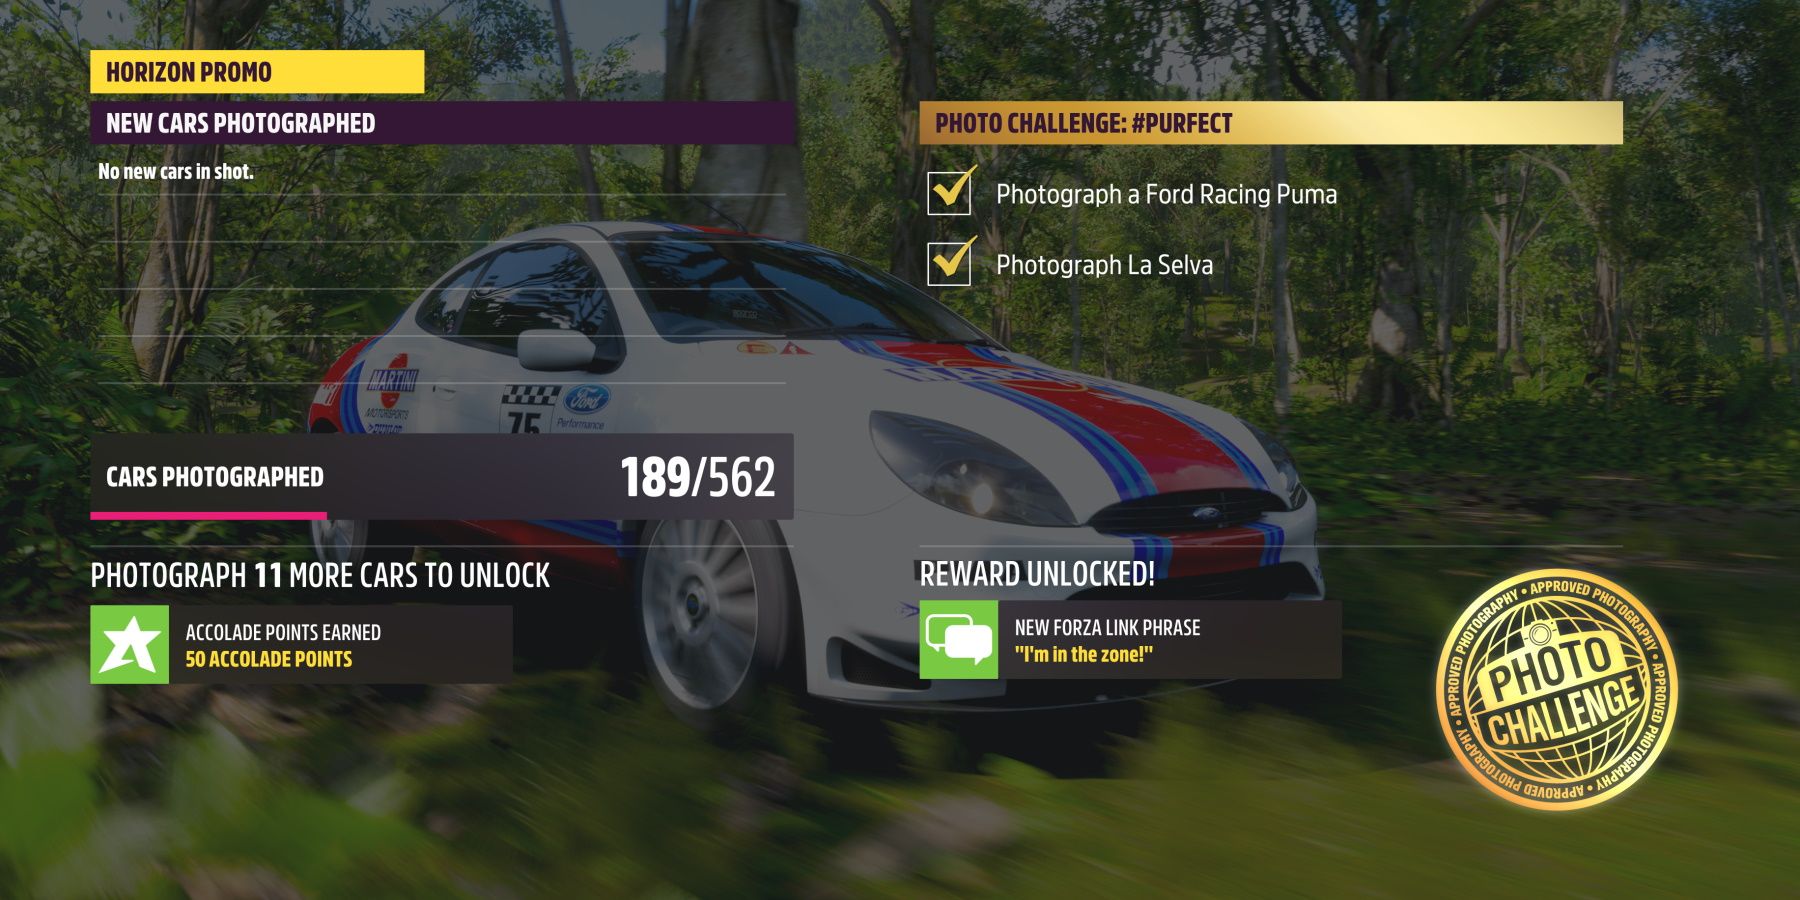 Forza Horizon 5 Purfect Photo Challenge unlocking Forza Link by taking picture in La Selva